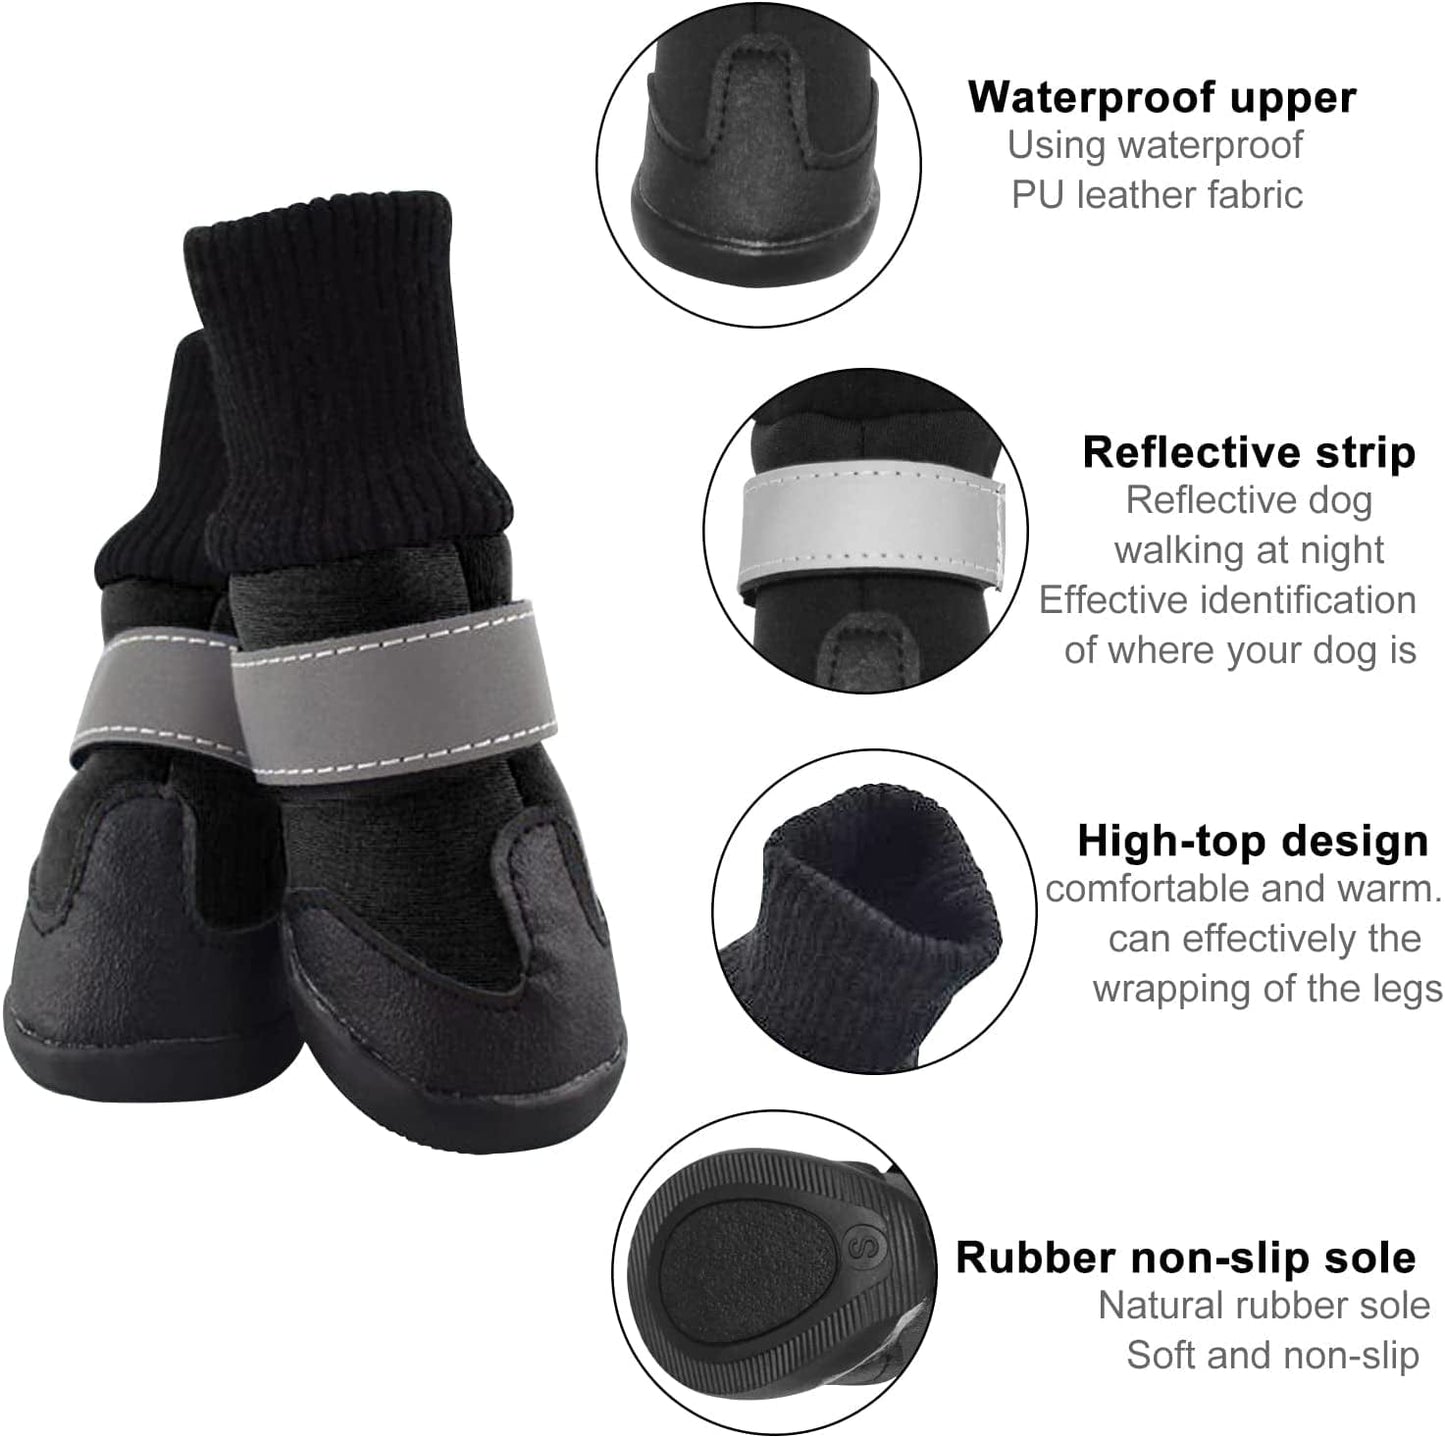 Dog Shoes, BESUNTEK Waterproof Dog Boots Paw Protector Snow Nonslip Rubber with Reflective Strip, Warm Lining, for Medium & Large Dogs 4 Pcs (Black, XL)